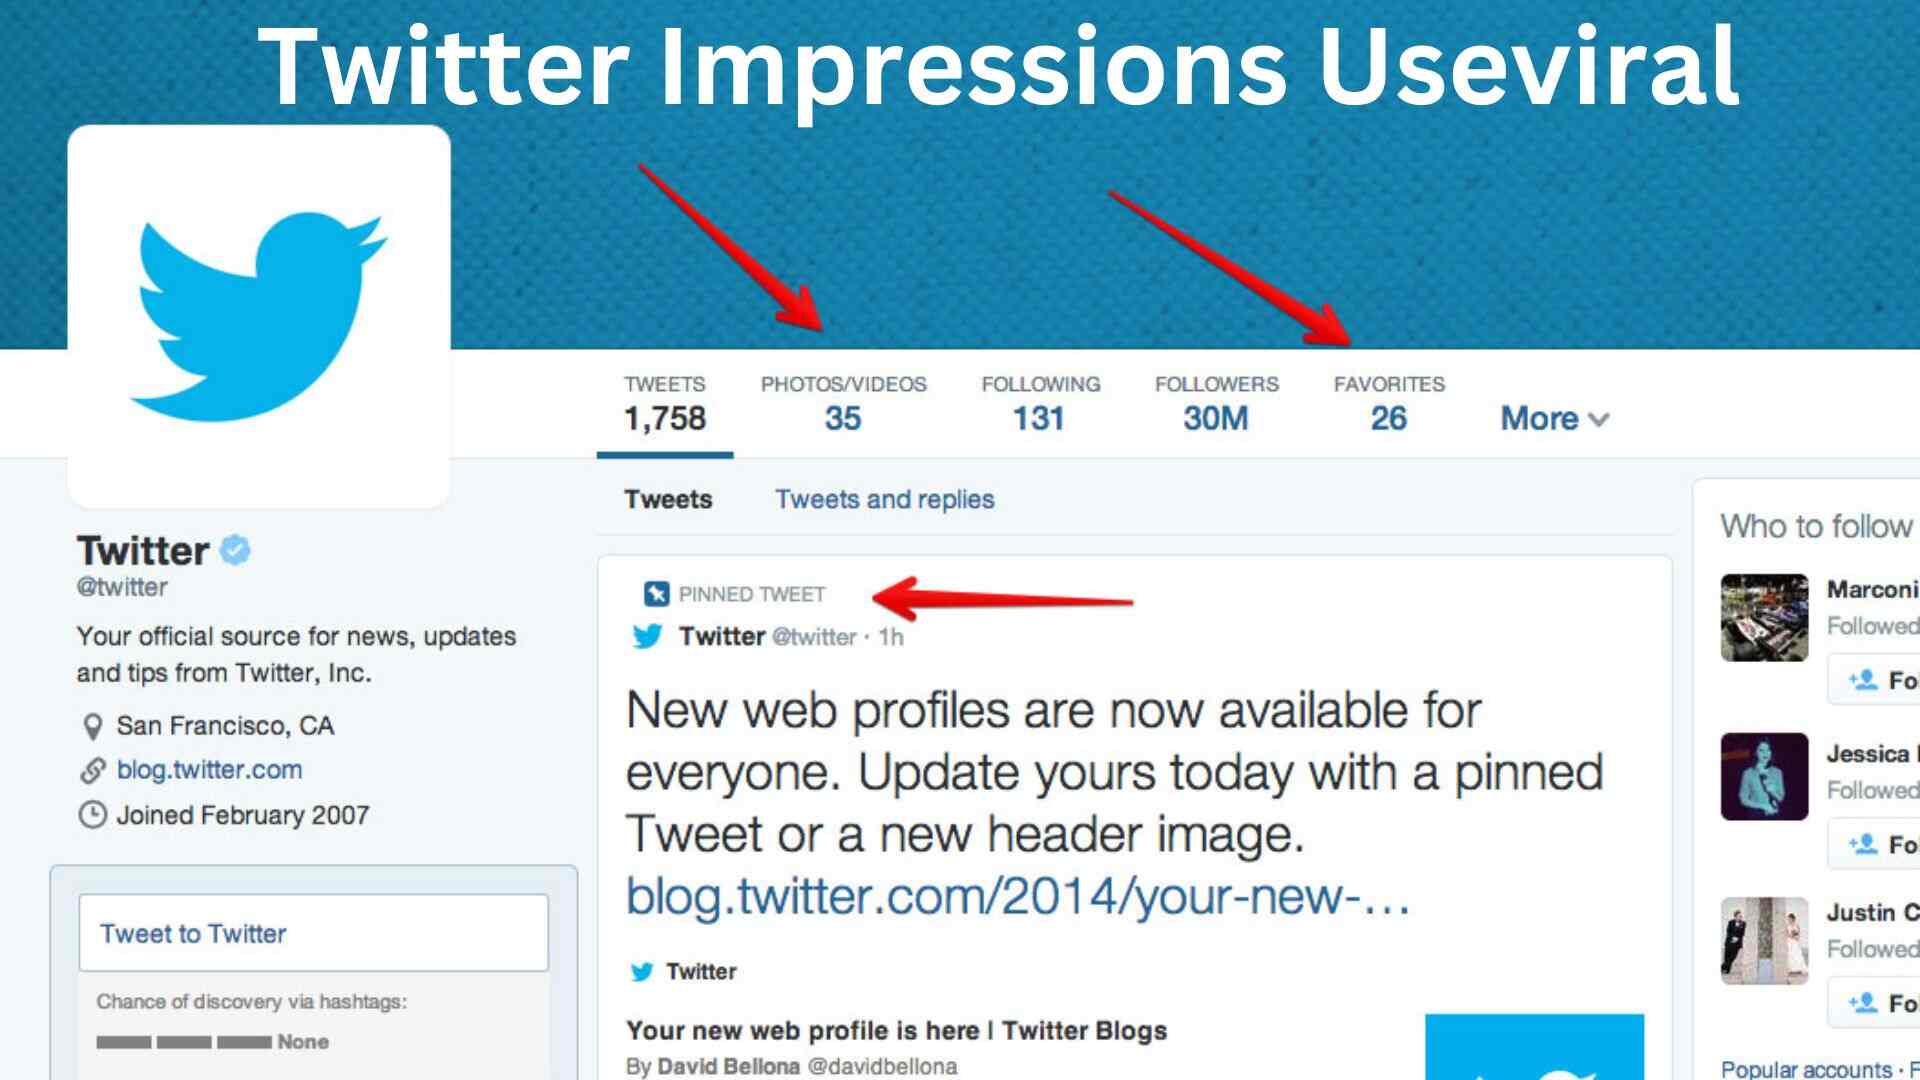 Twitter Impressions Useviral